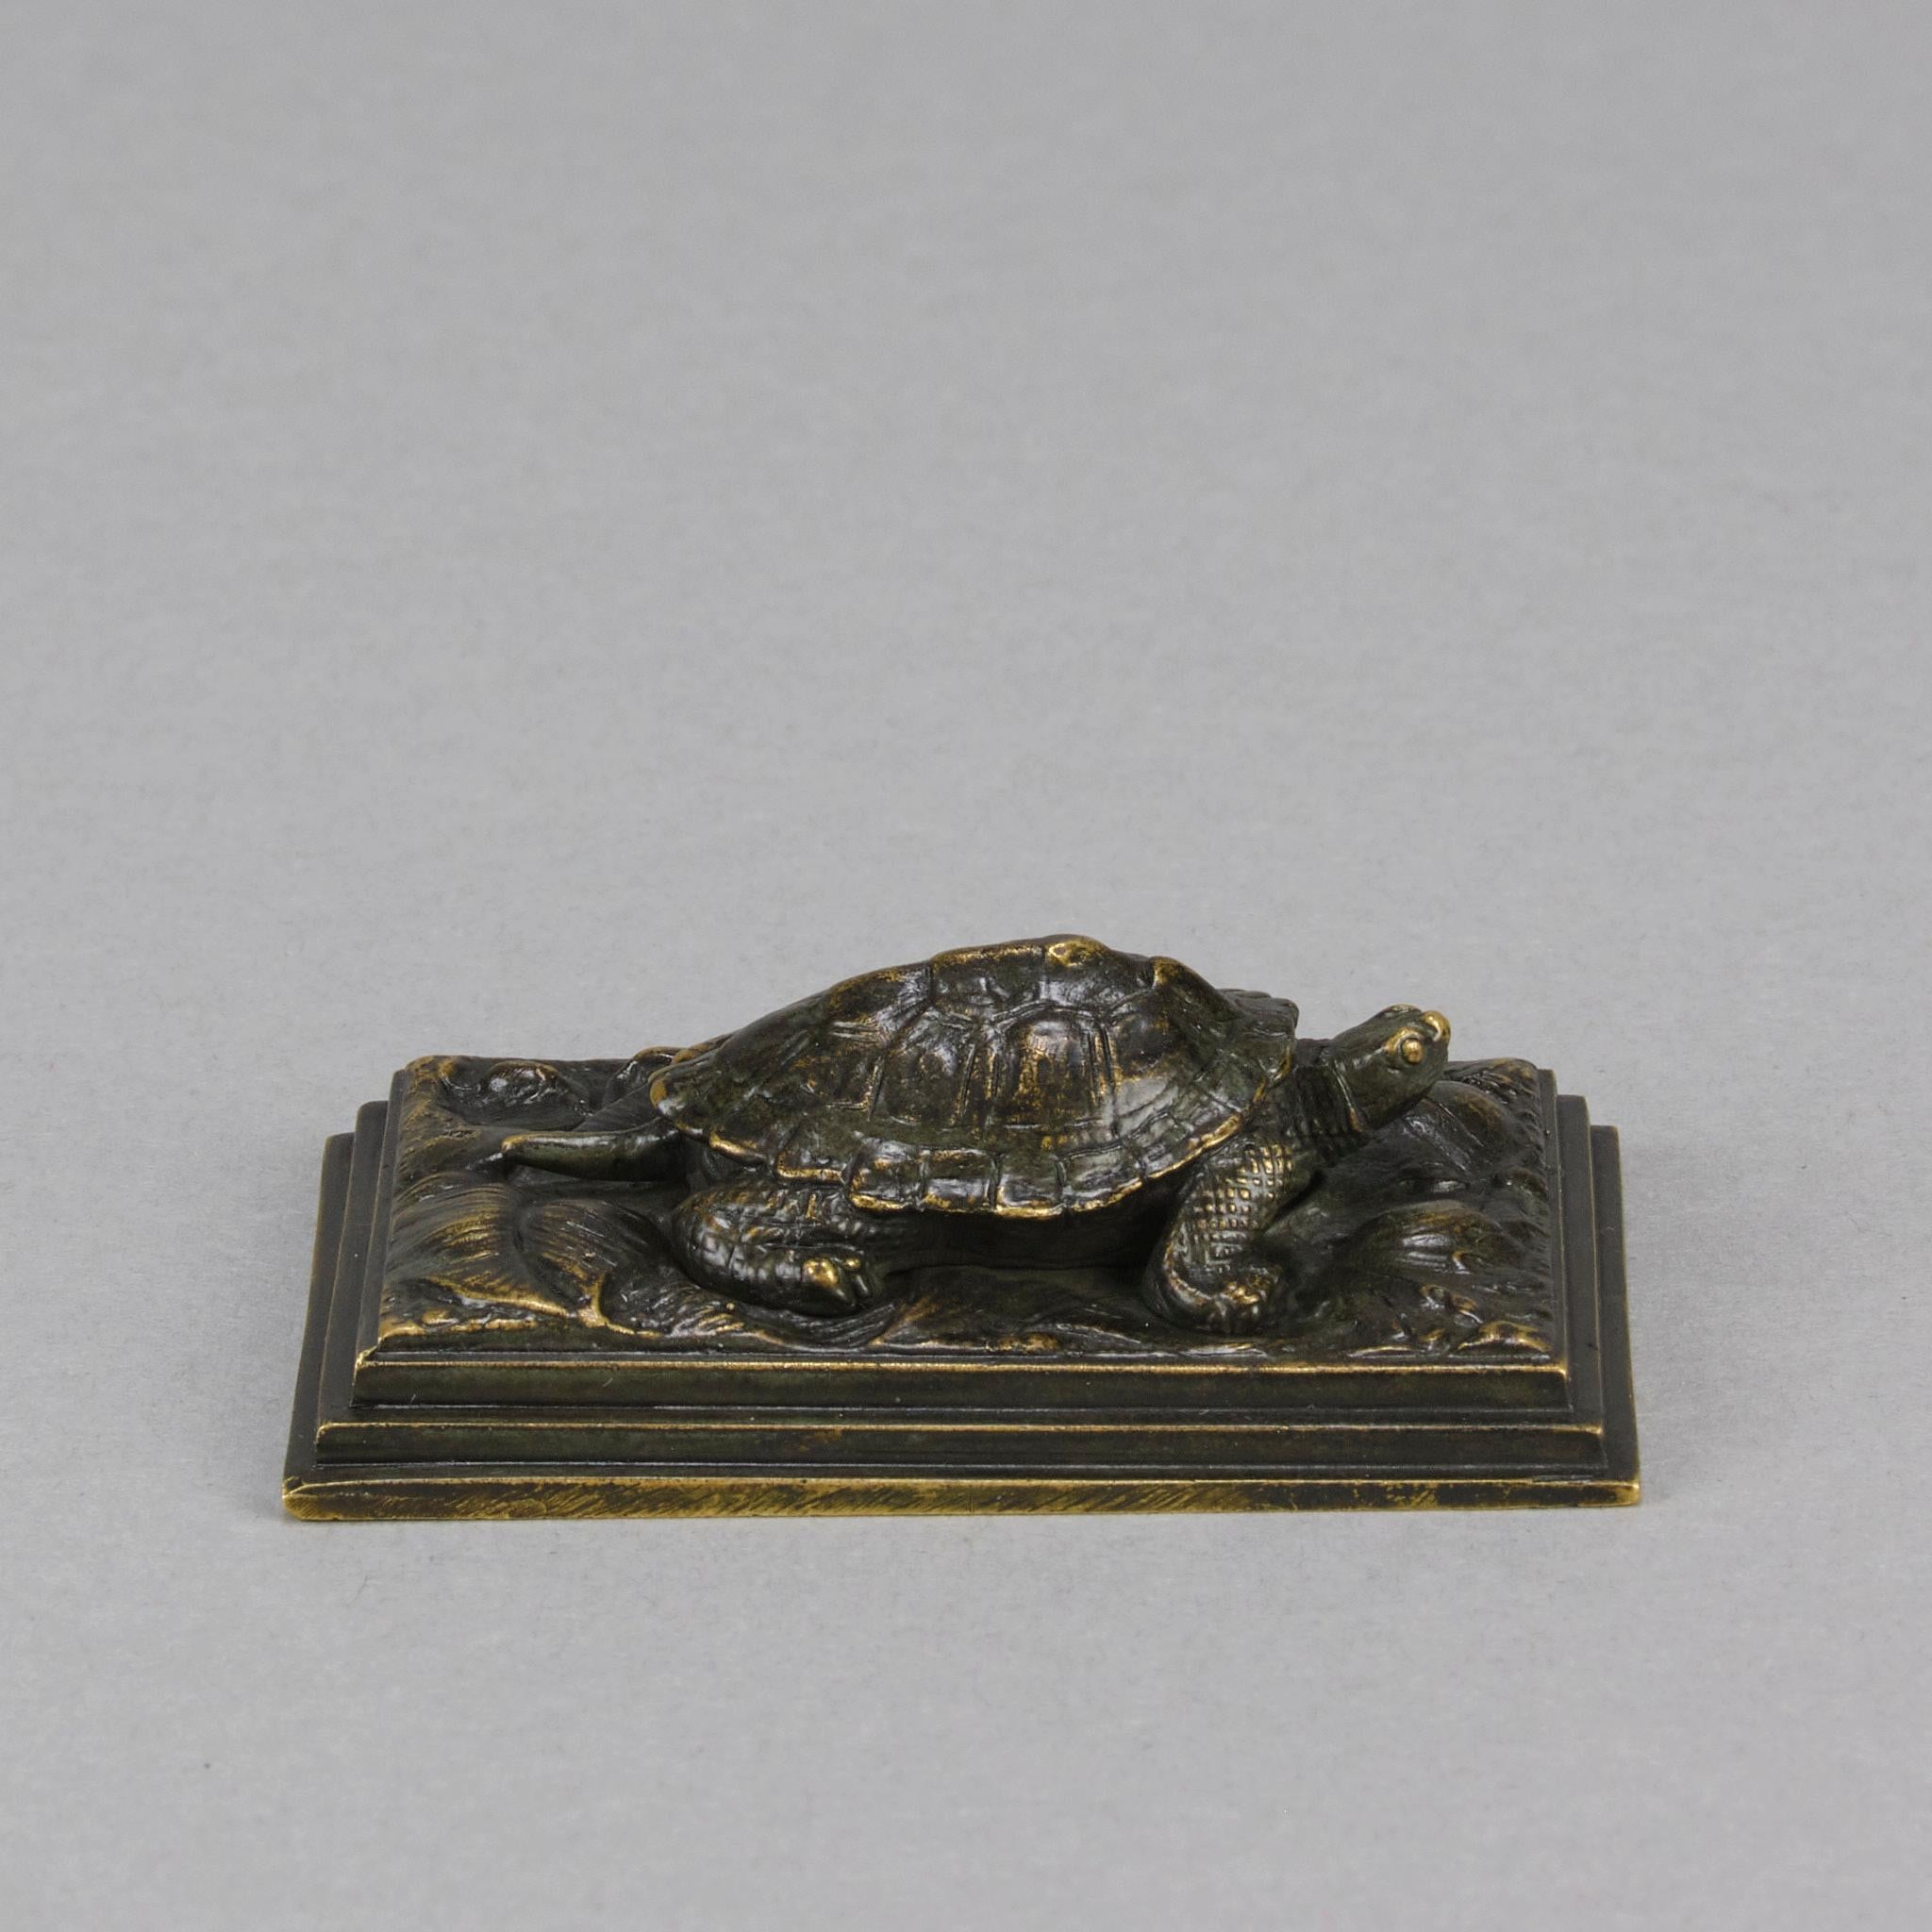 A delightful mid 19th Century French bronze figure of a tortoise with excellent hand chased surface deail and very fine fine rich brown patina rubbed to a golden hue in areas, raised on a stepped base and signed Barye
ADDITIONAL INFORMATION

Height: